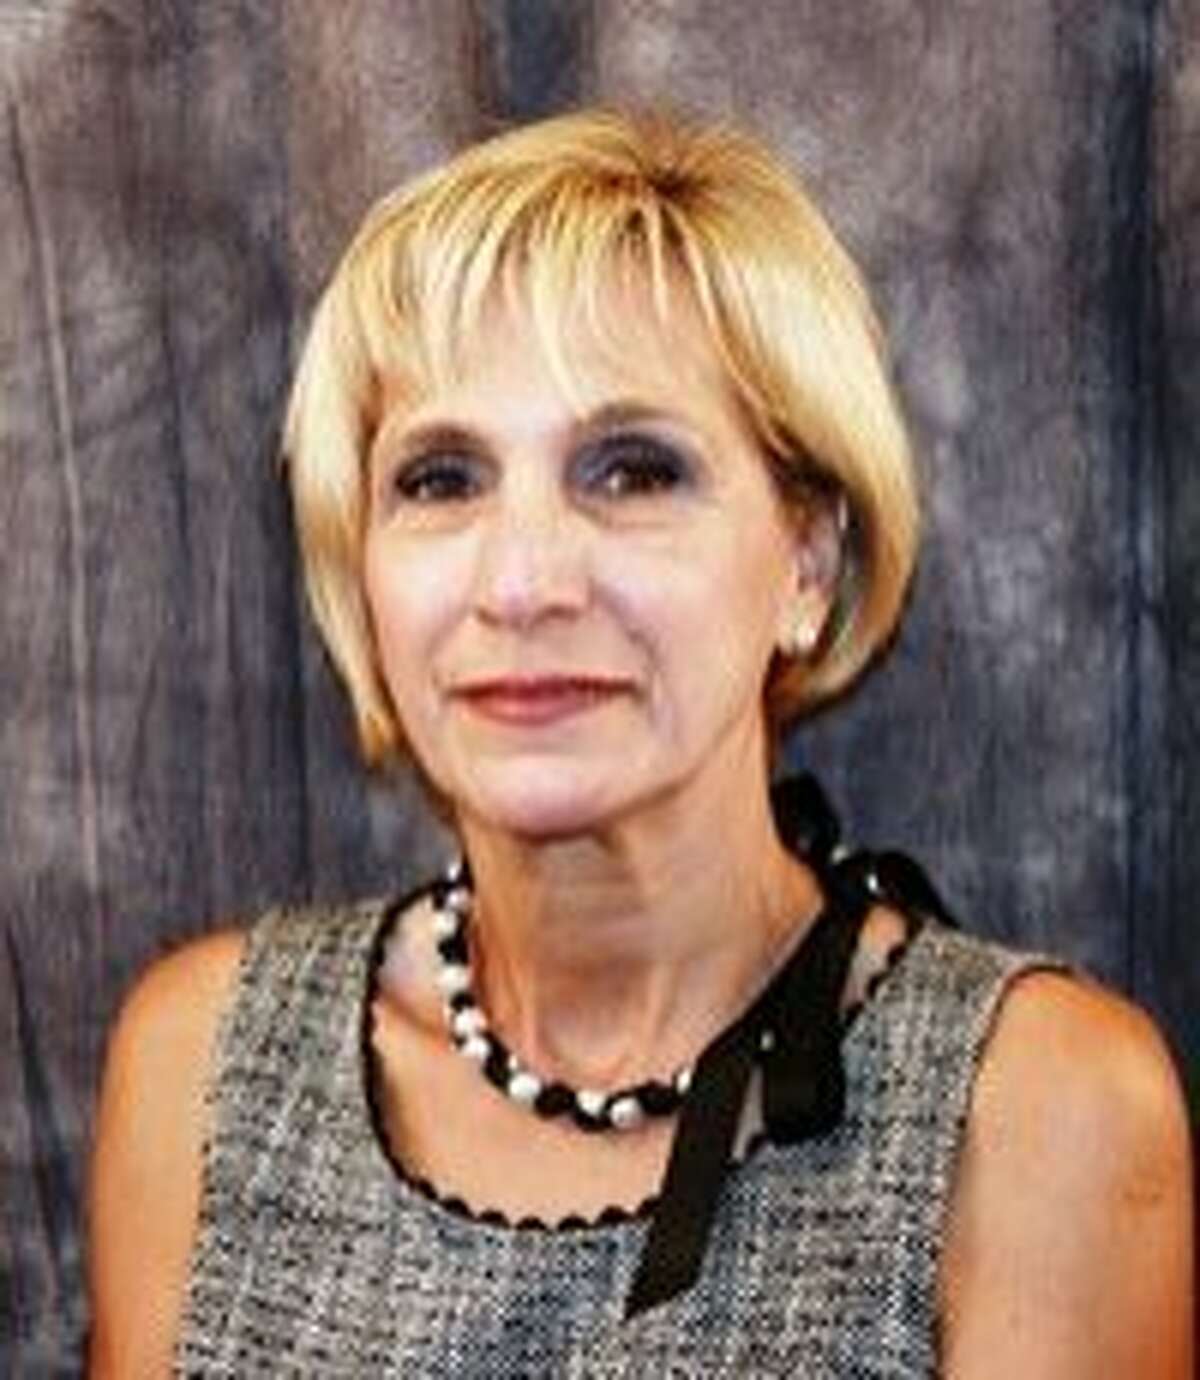 Connie Prado was elected president of the South San Antonio ISD Board of Trustees after the Nov. 4, 2014, board elections.